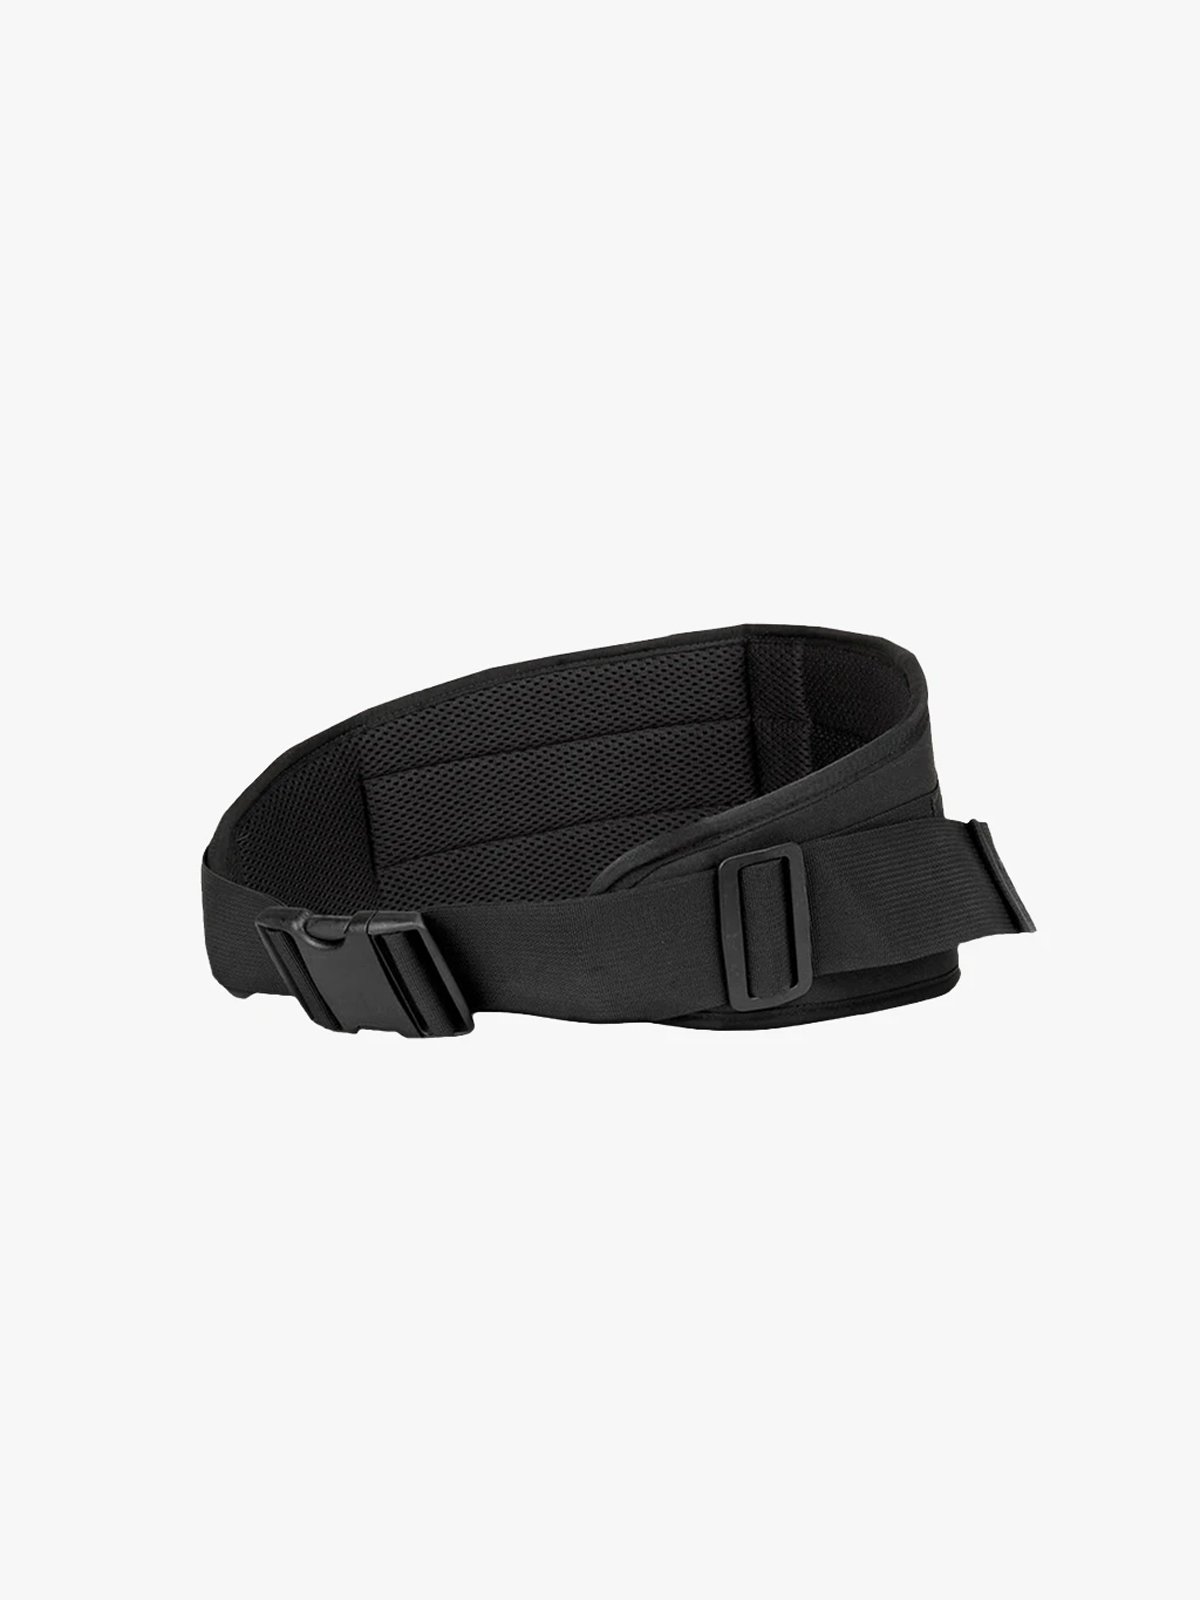 Low-Profile Waist-Belt by Mission Workshop - Weatherproof Bags & Technical Apparel - San Francisco & Los Angeles - Built to endure - Guaranteed forever